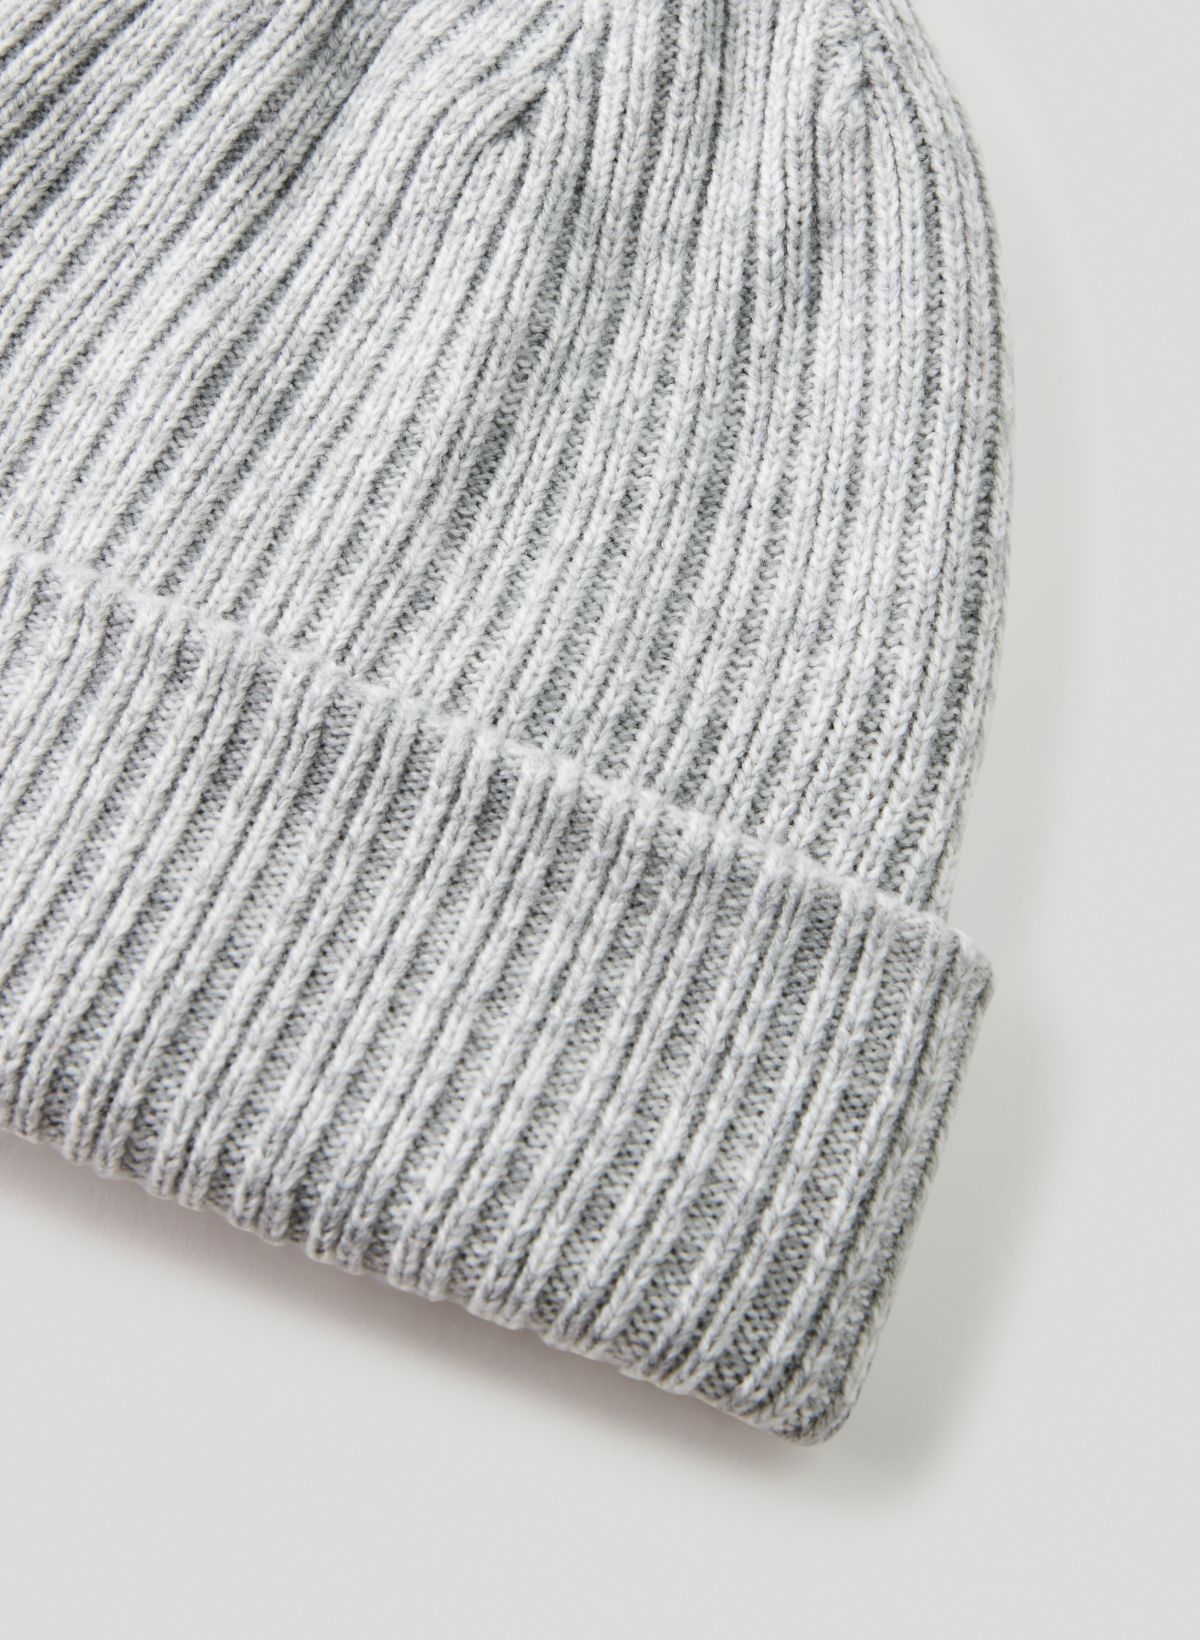 Warm Slouchy Beanie Hat - Deliciously Soft Daily Beanie in Fine Knit Light  Heather Grey One Size : : Clothing & Accessories